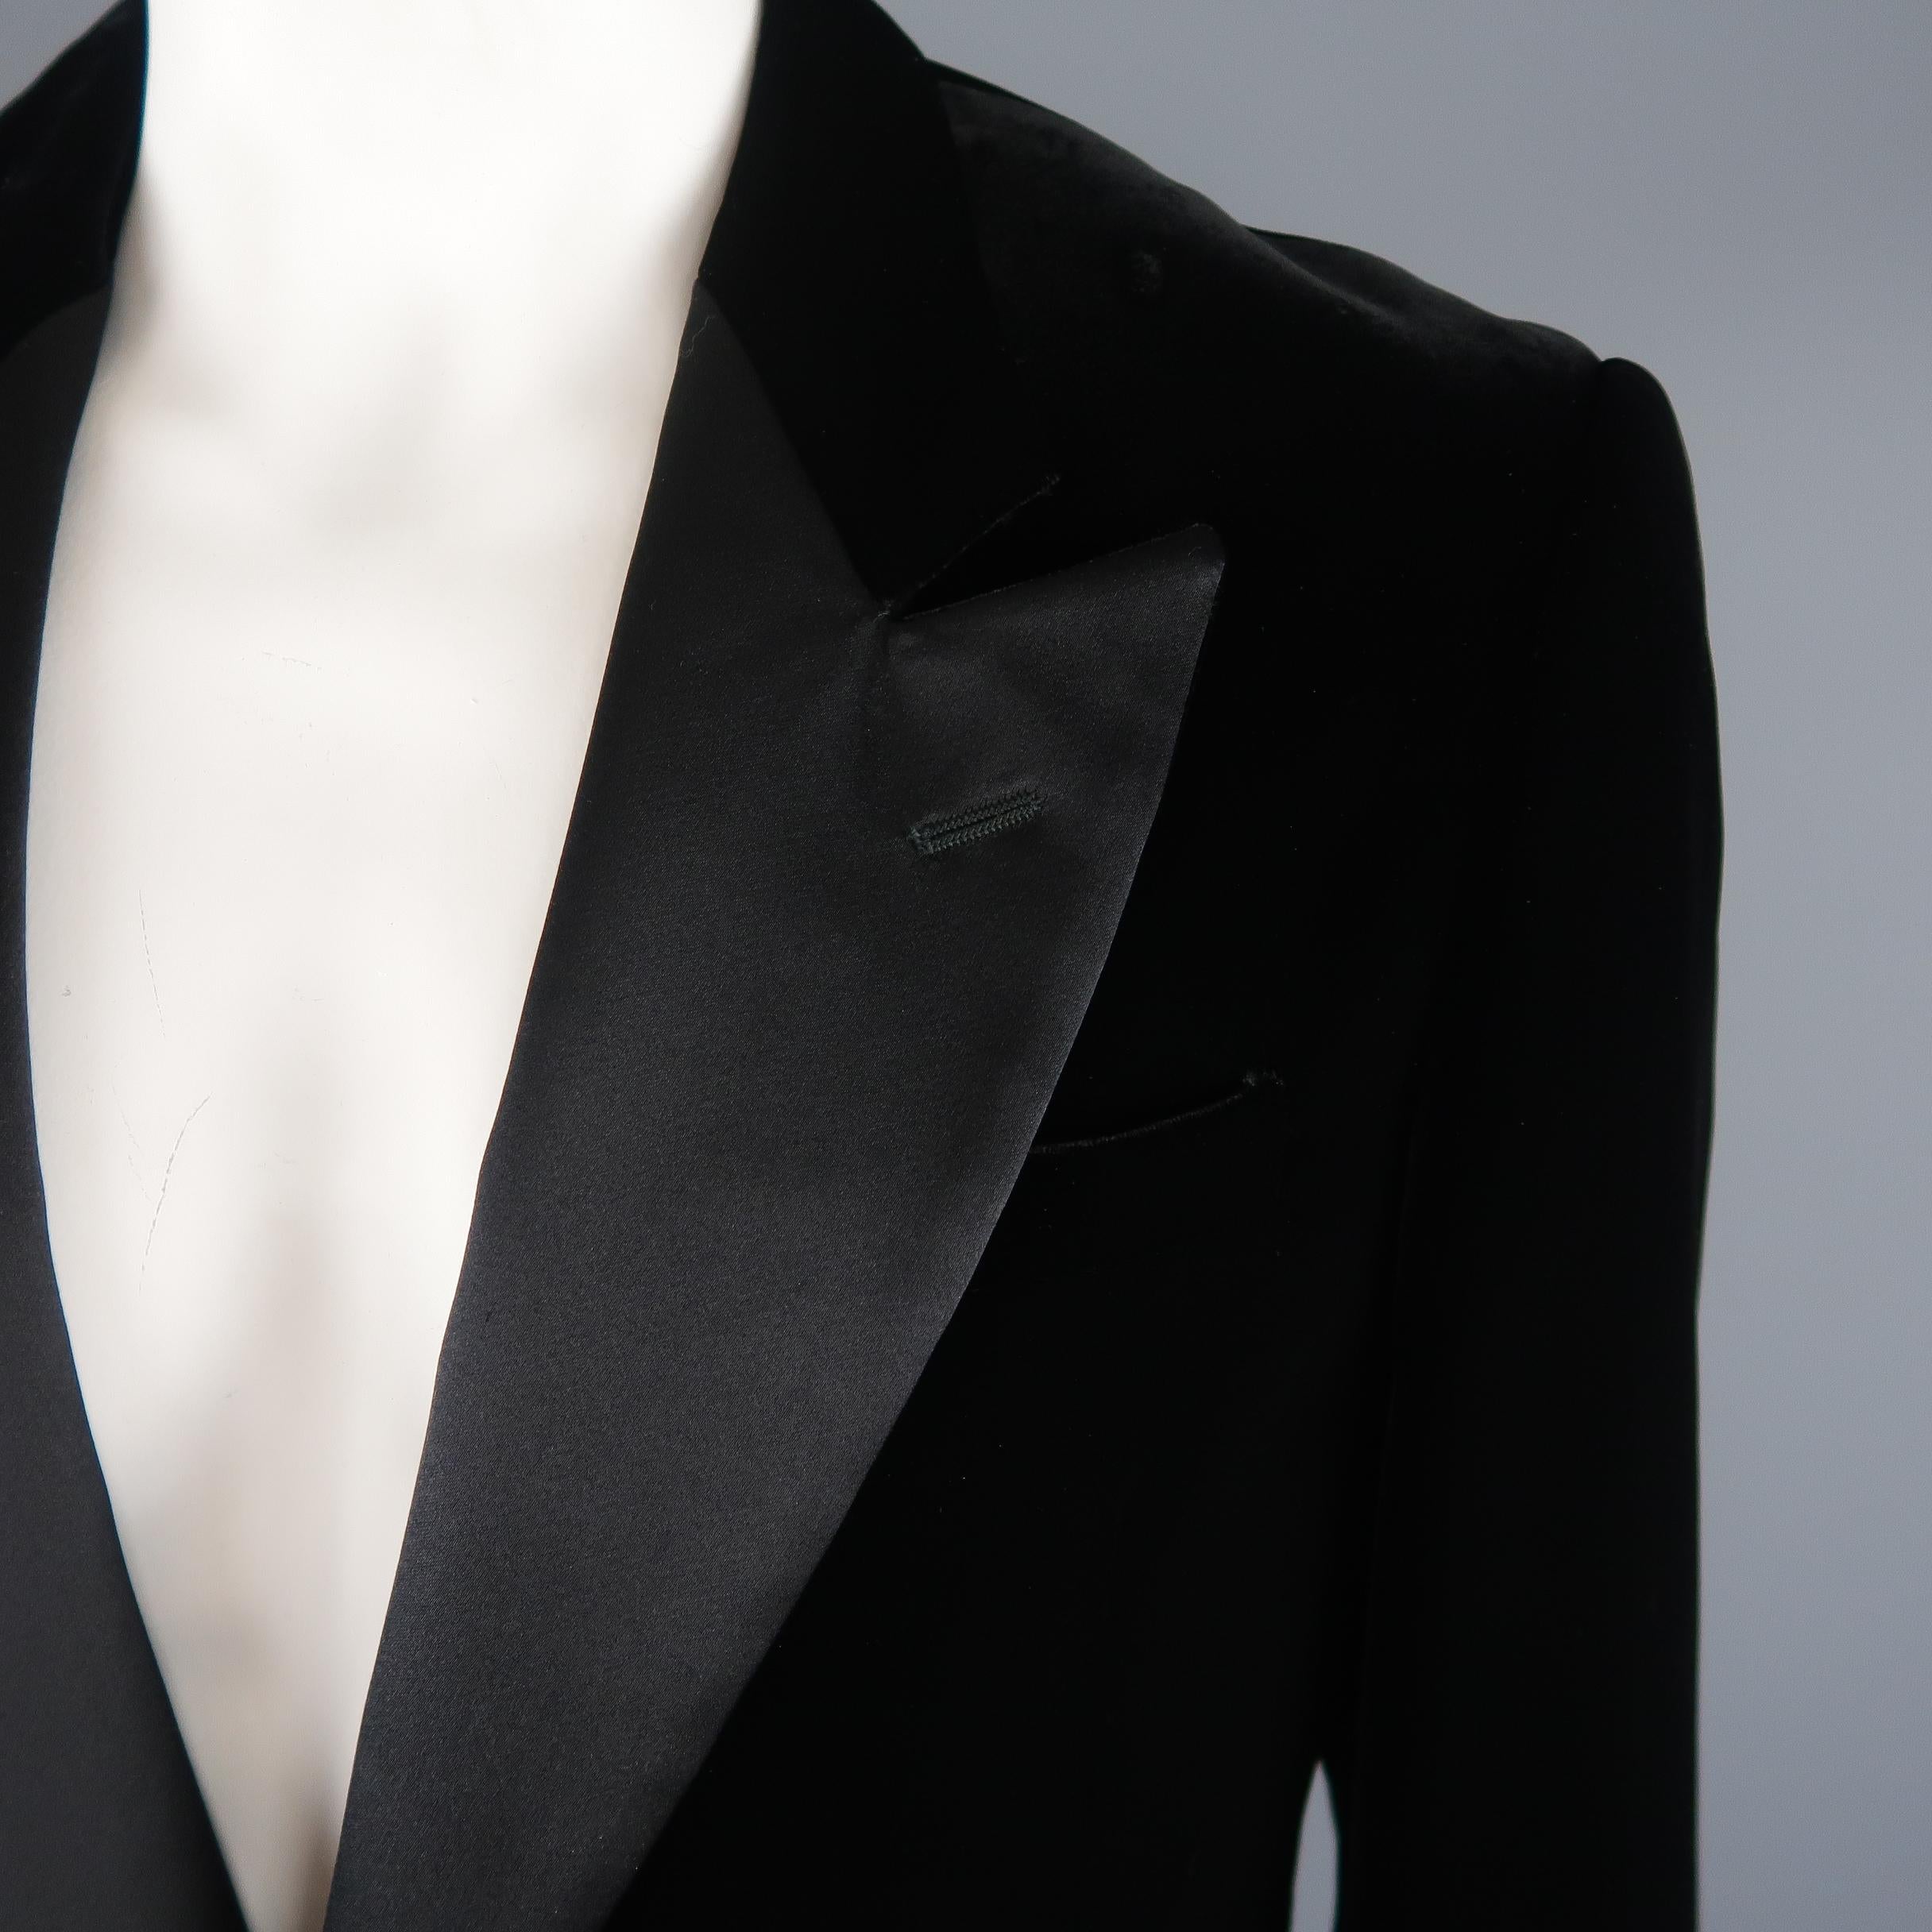 ARMANI COLLEZIONI tuxedo jacket comes in black velvet with a single button closure, satin buttons, and half satin peak lapel. 

Made in Italy. 
Excellent Pre-Owned Condition.
Marked: 44 R
 
Measurements:
 
Shoulder: 19 in.
Chest: 46 in.
Sleeve: 24.5